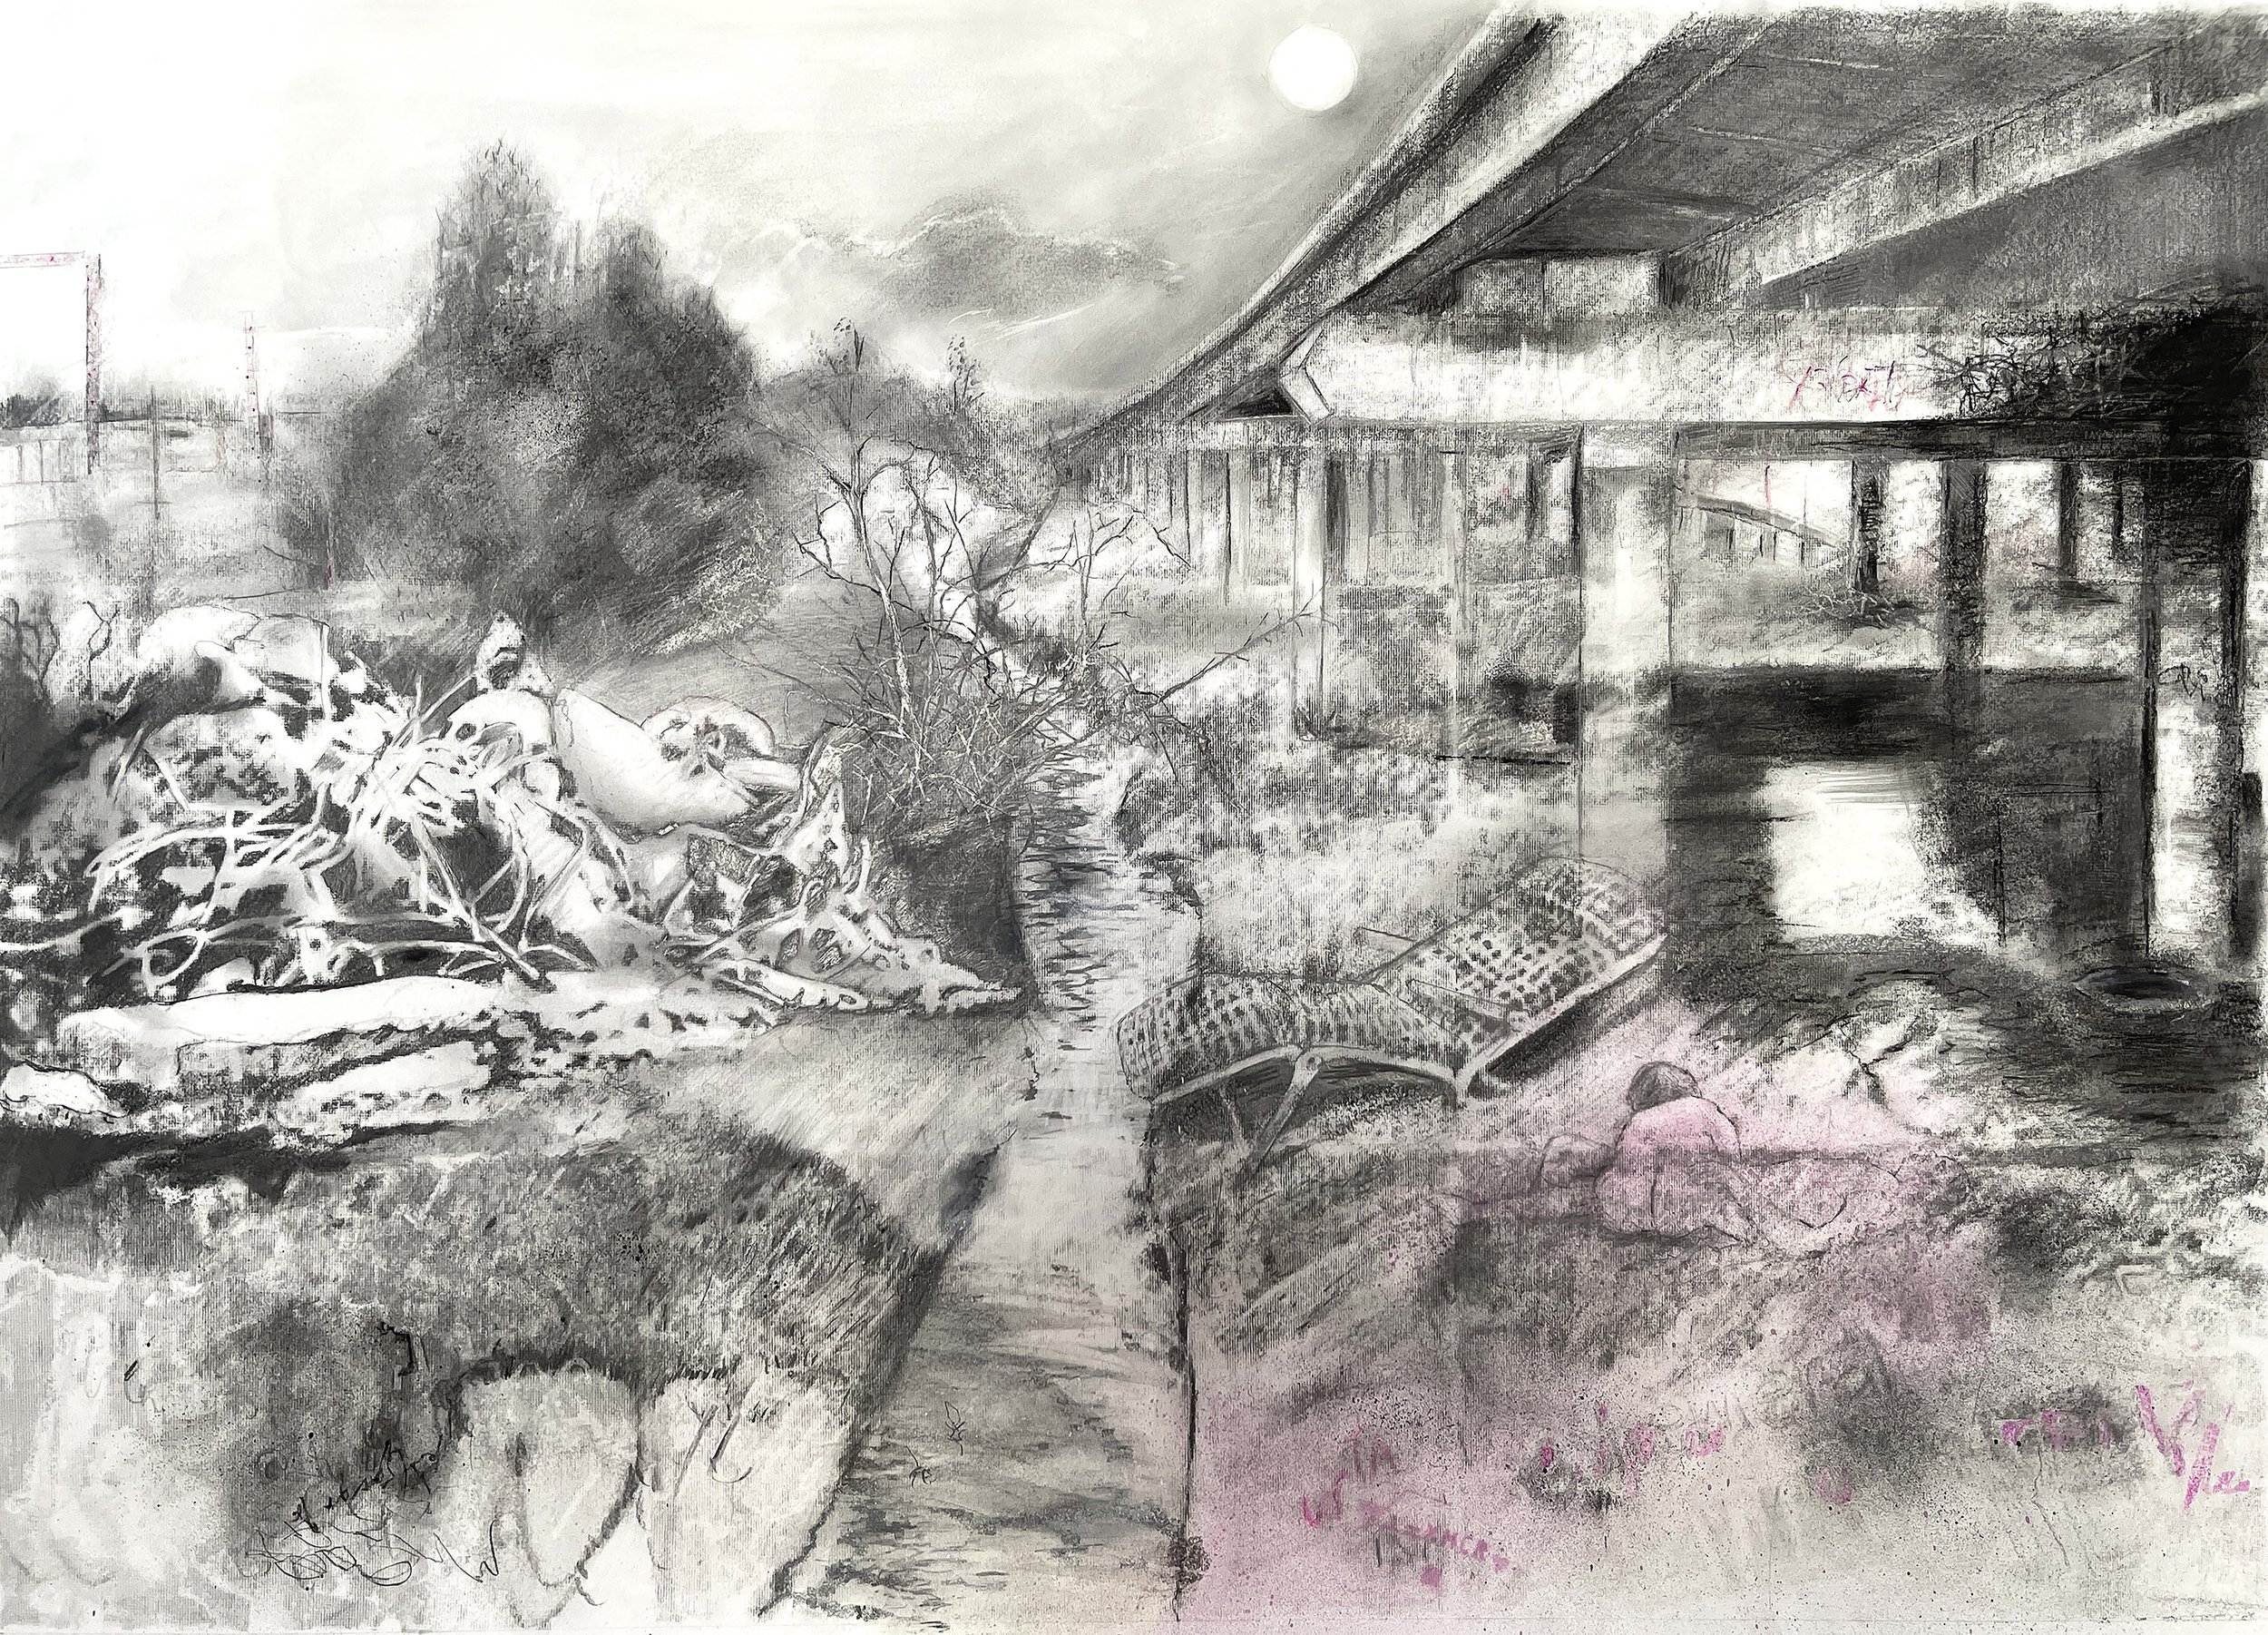 Some Kind of Nature:  Graphite, pencil, spray paint and ink on Fabriano paper 78 x 98 cm, 2022